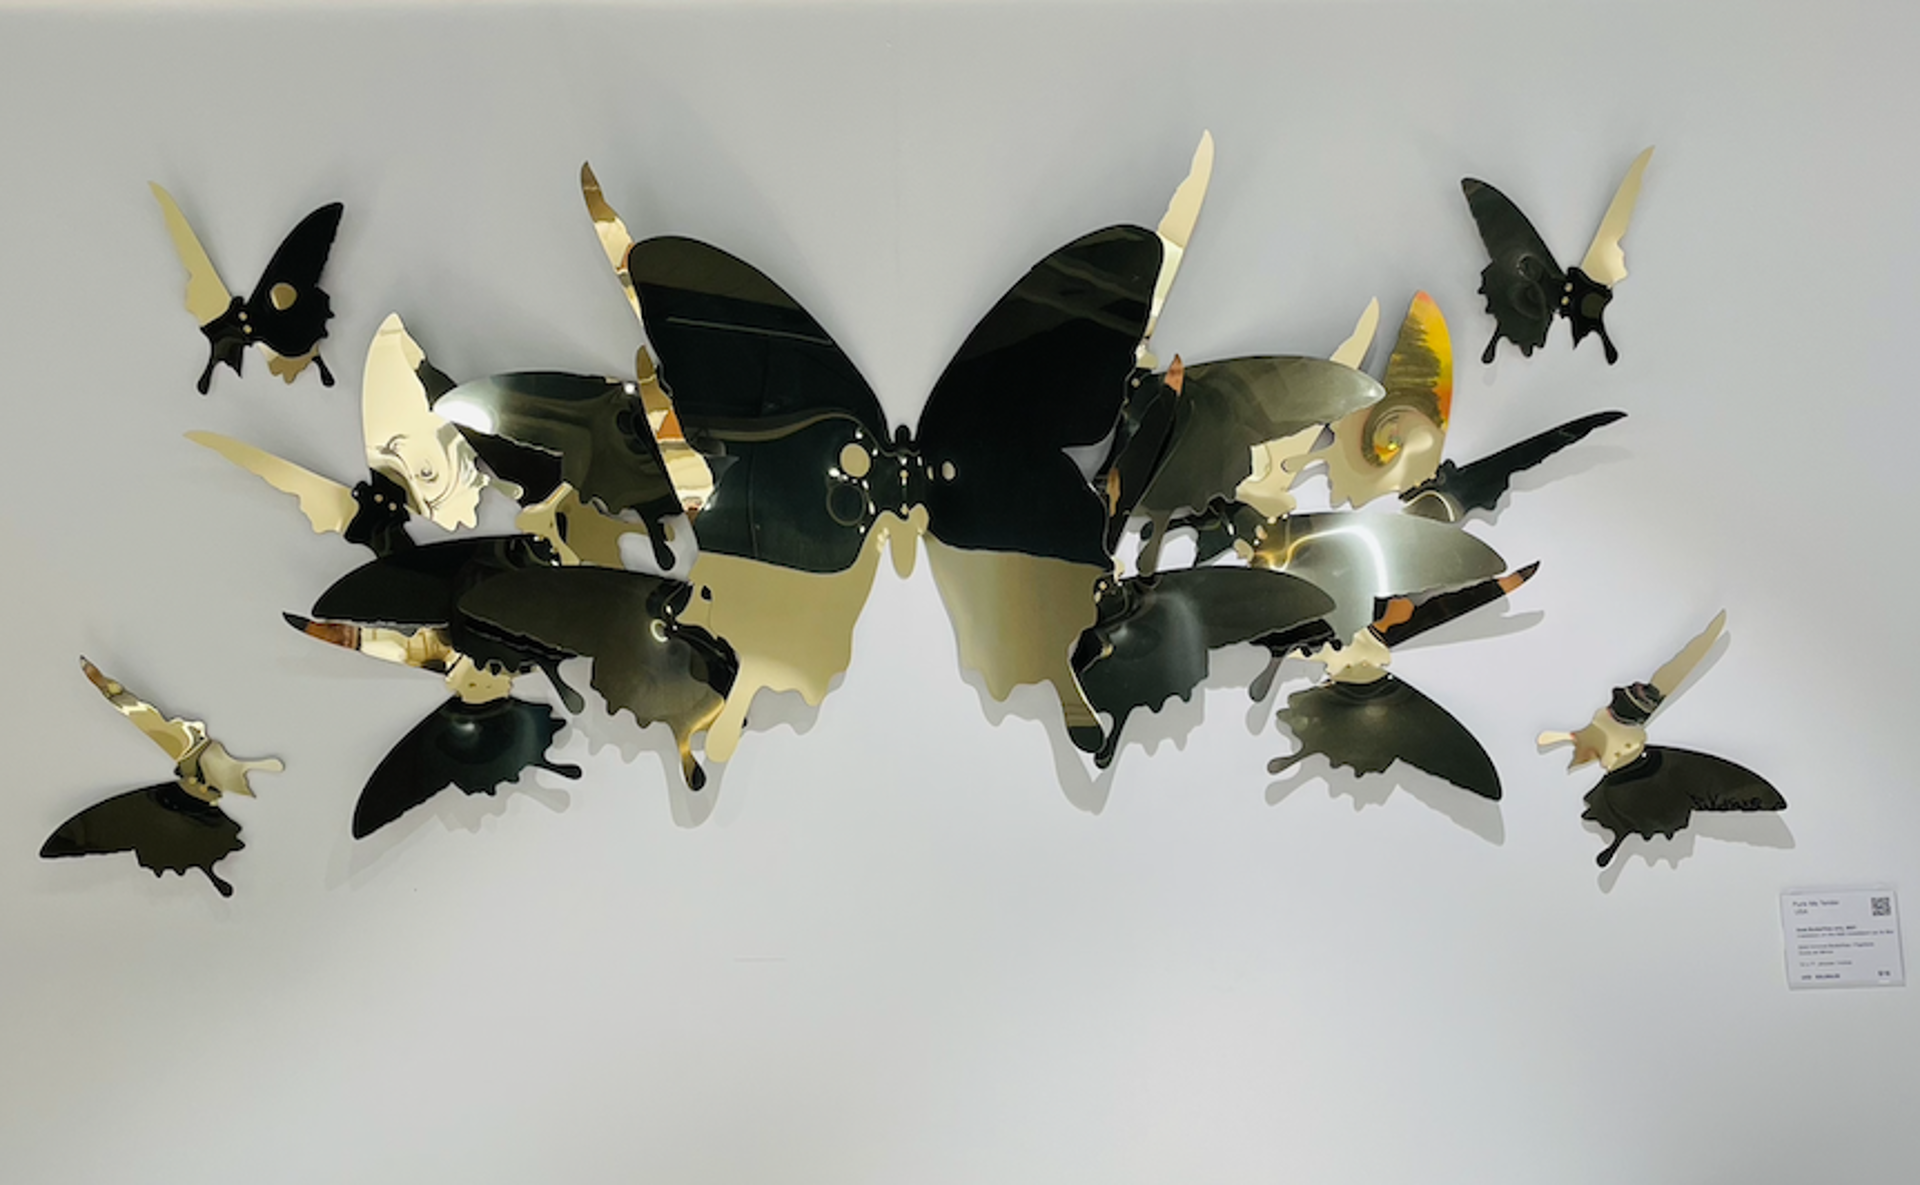 Installation on wall (Gold butterflies only) by PUNK ME TENDER